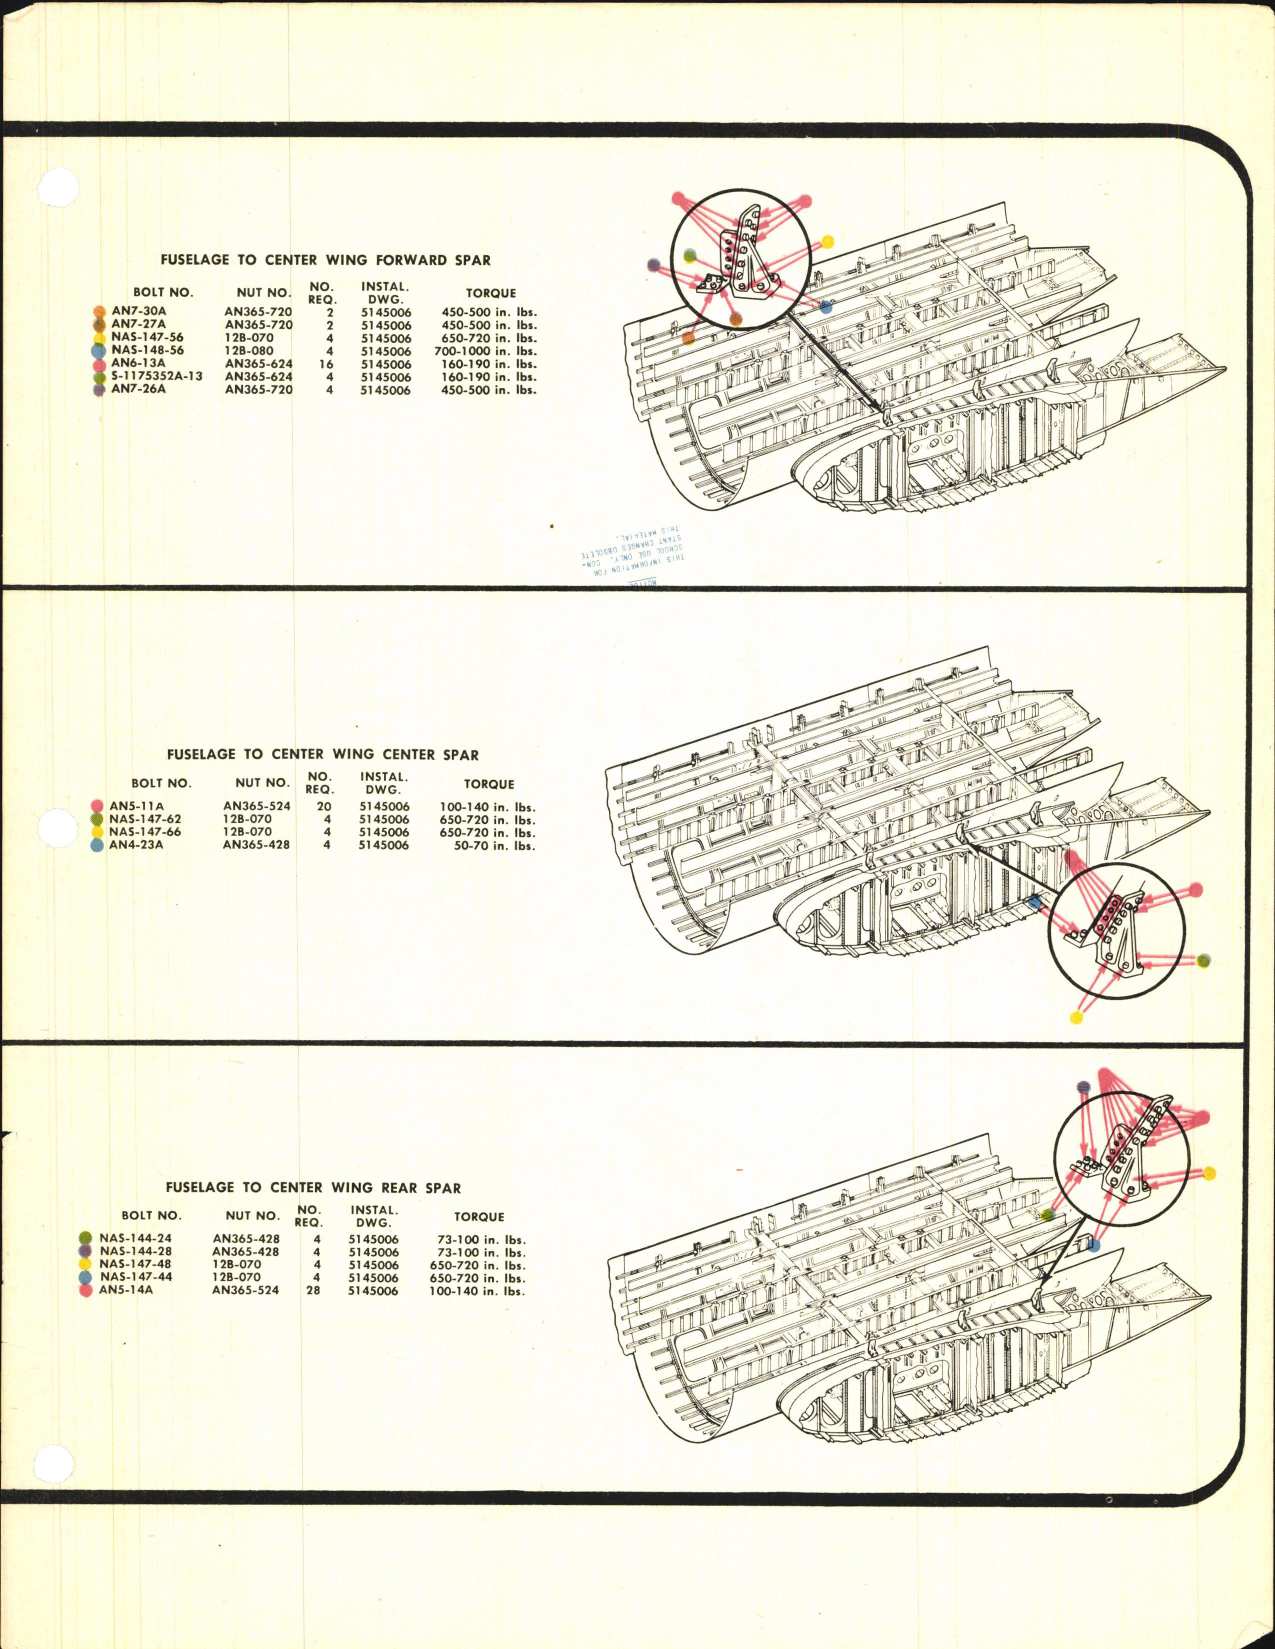 Sample page 5 from AirCorps Library document: C-54, C-54A, and C-54B Torque Values